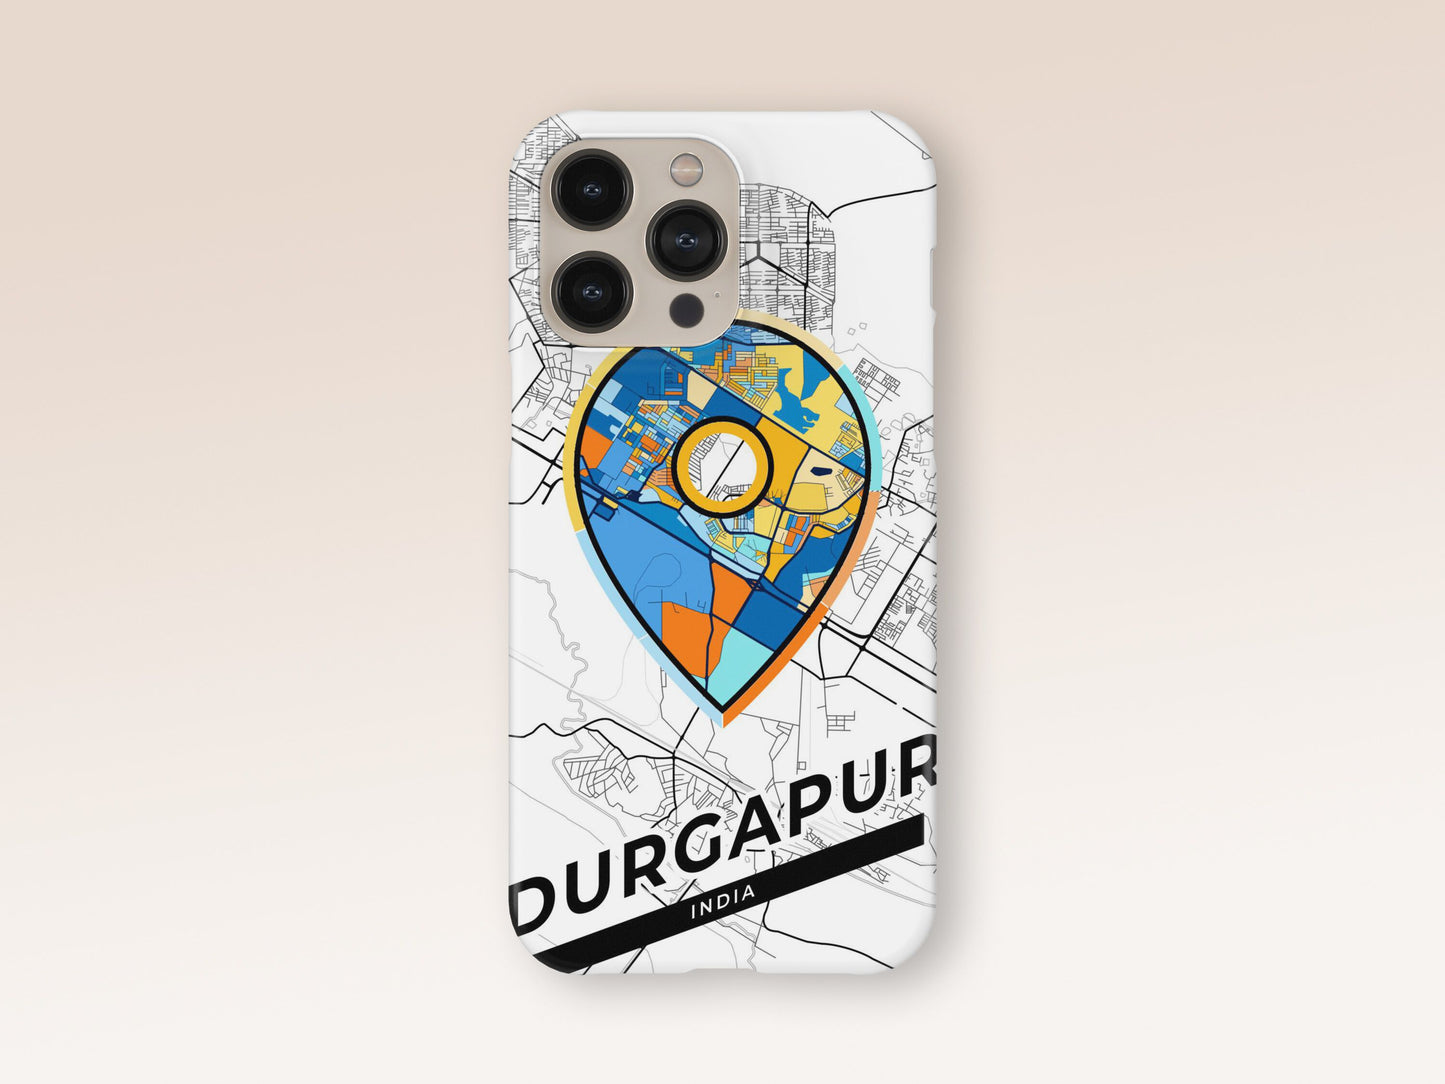 Durgapur India slim phone case with colorful icon. Birthday, wedding or housewarming gift. Couple match cases. 1